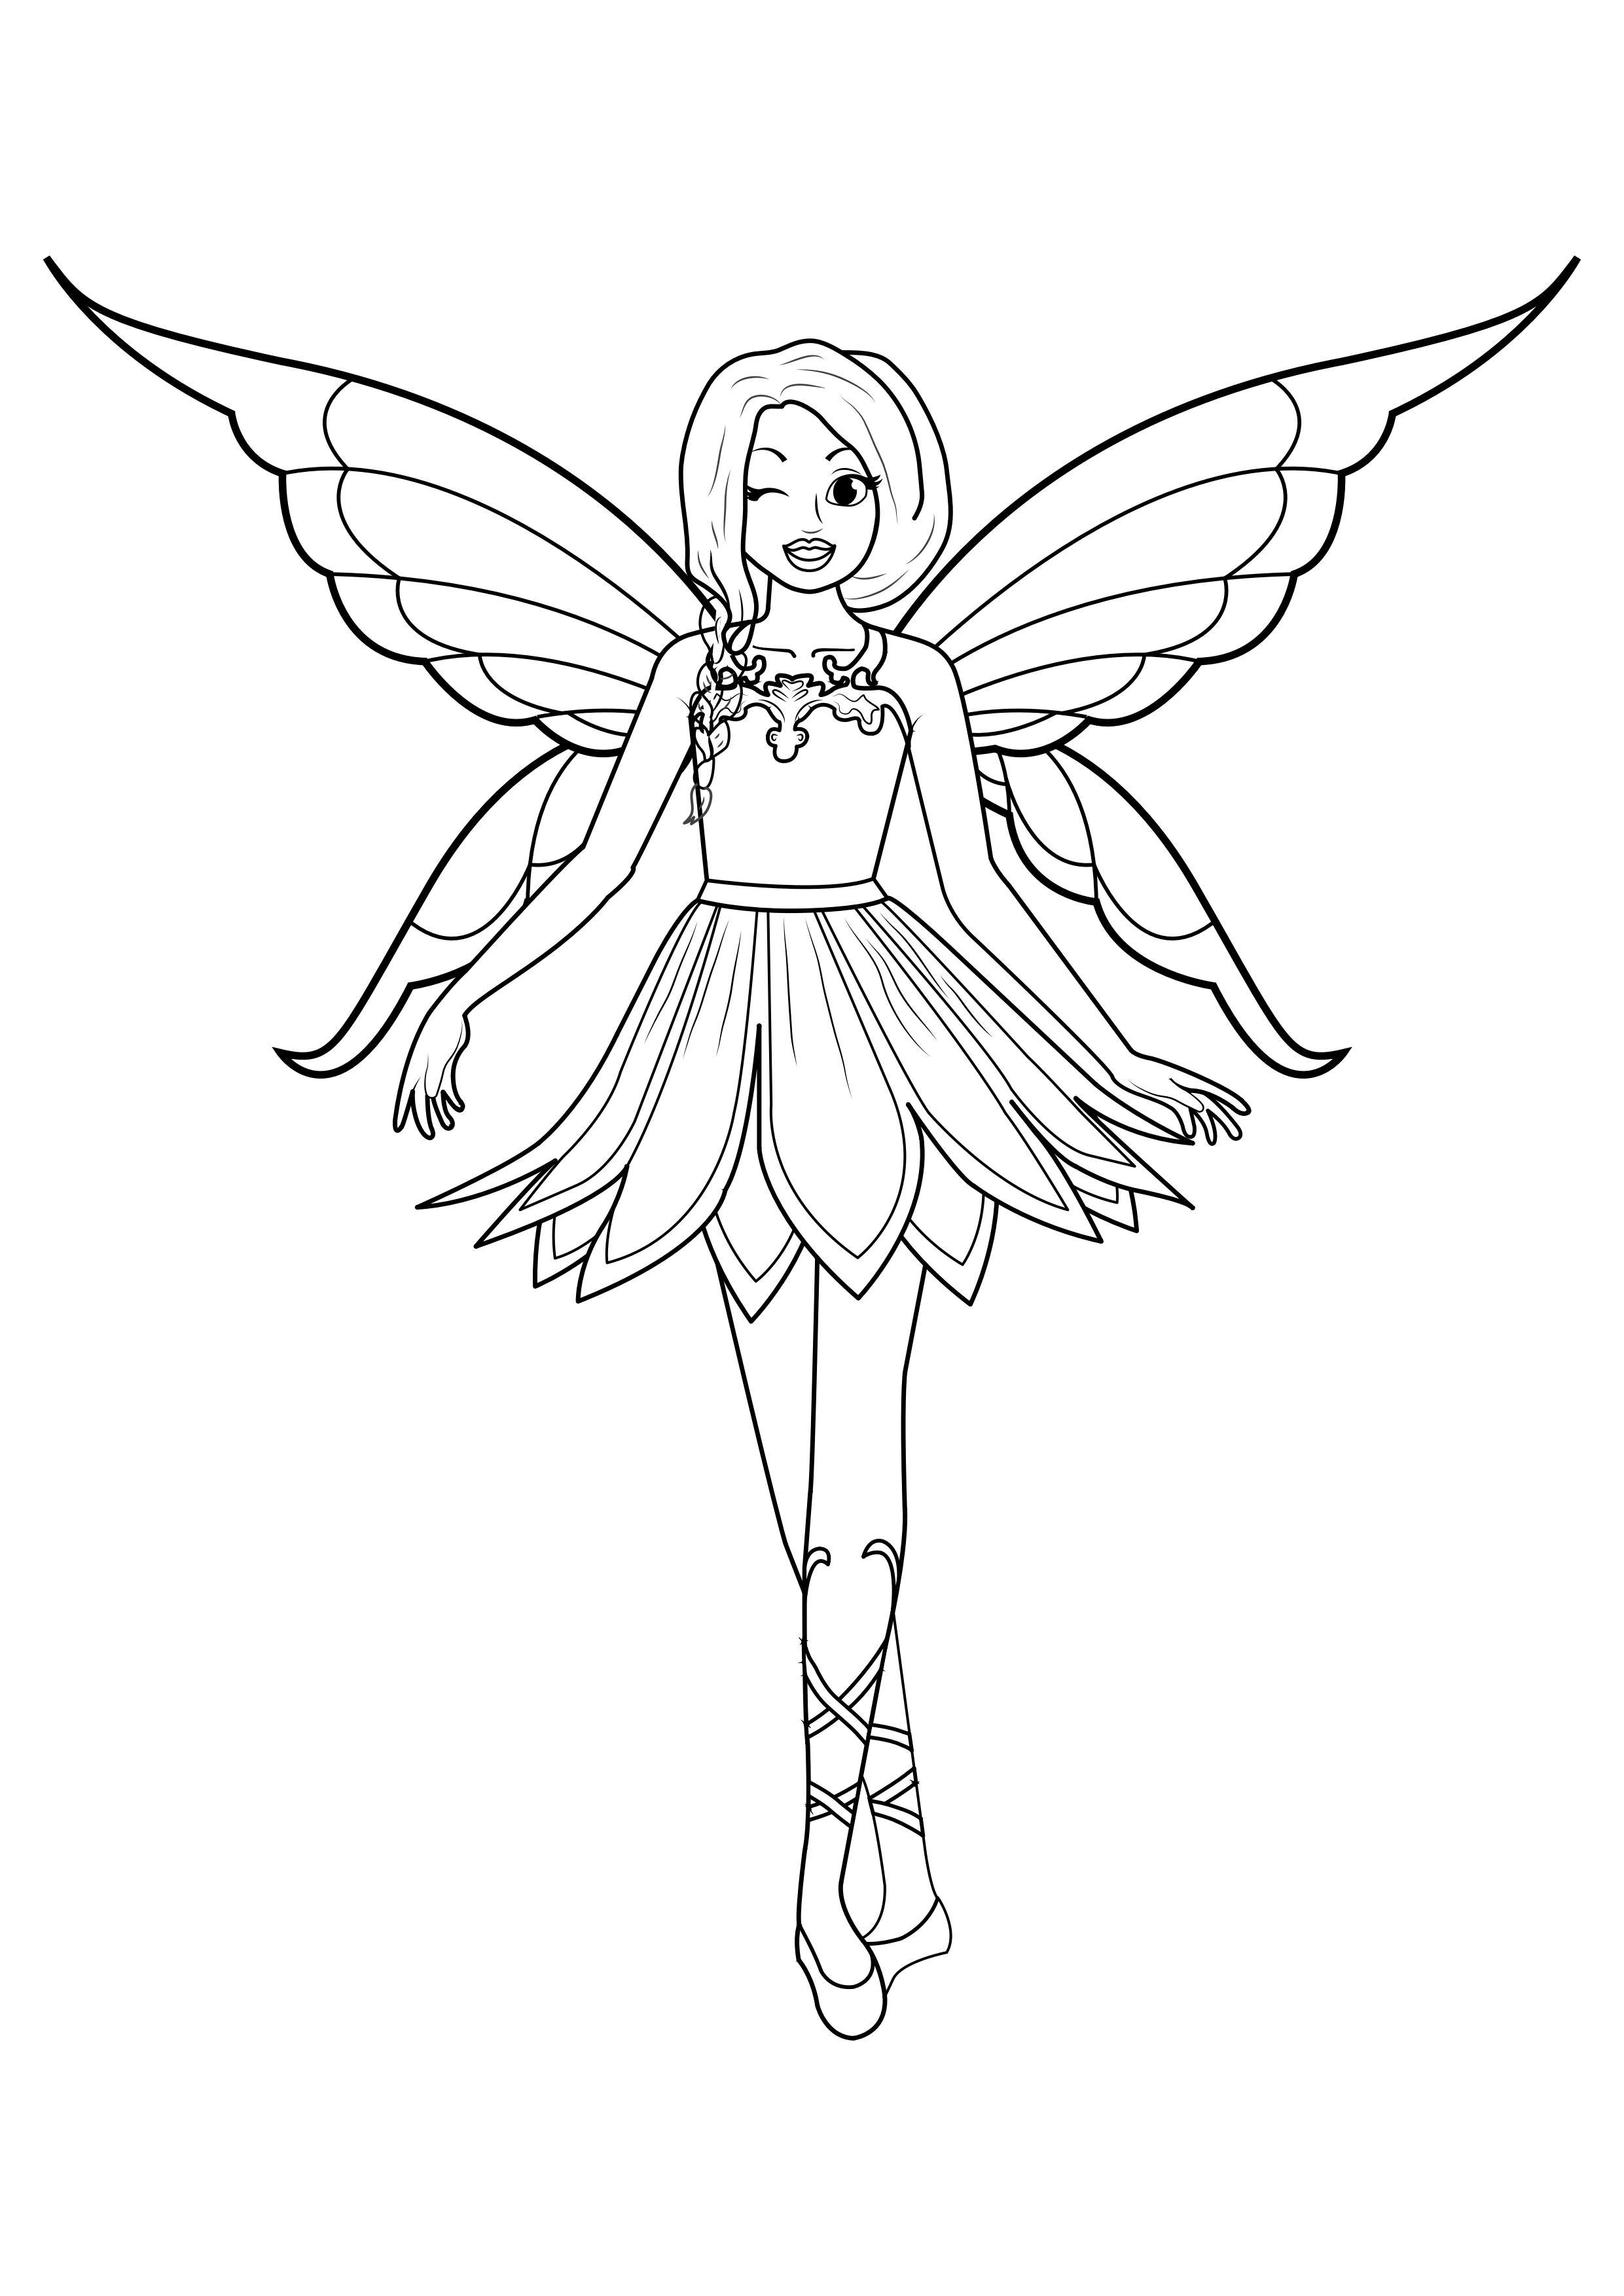 Coloring page fairy with wink